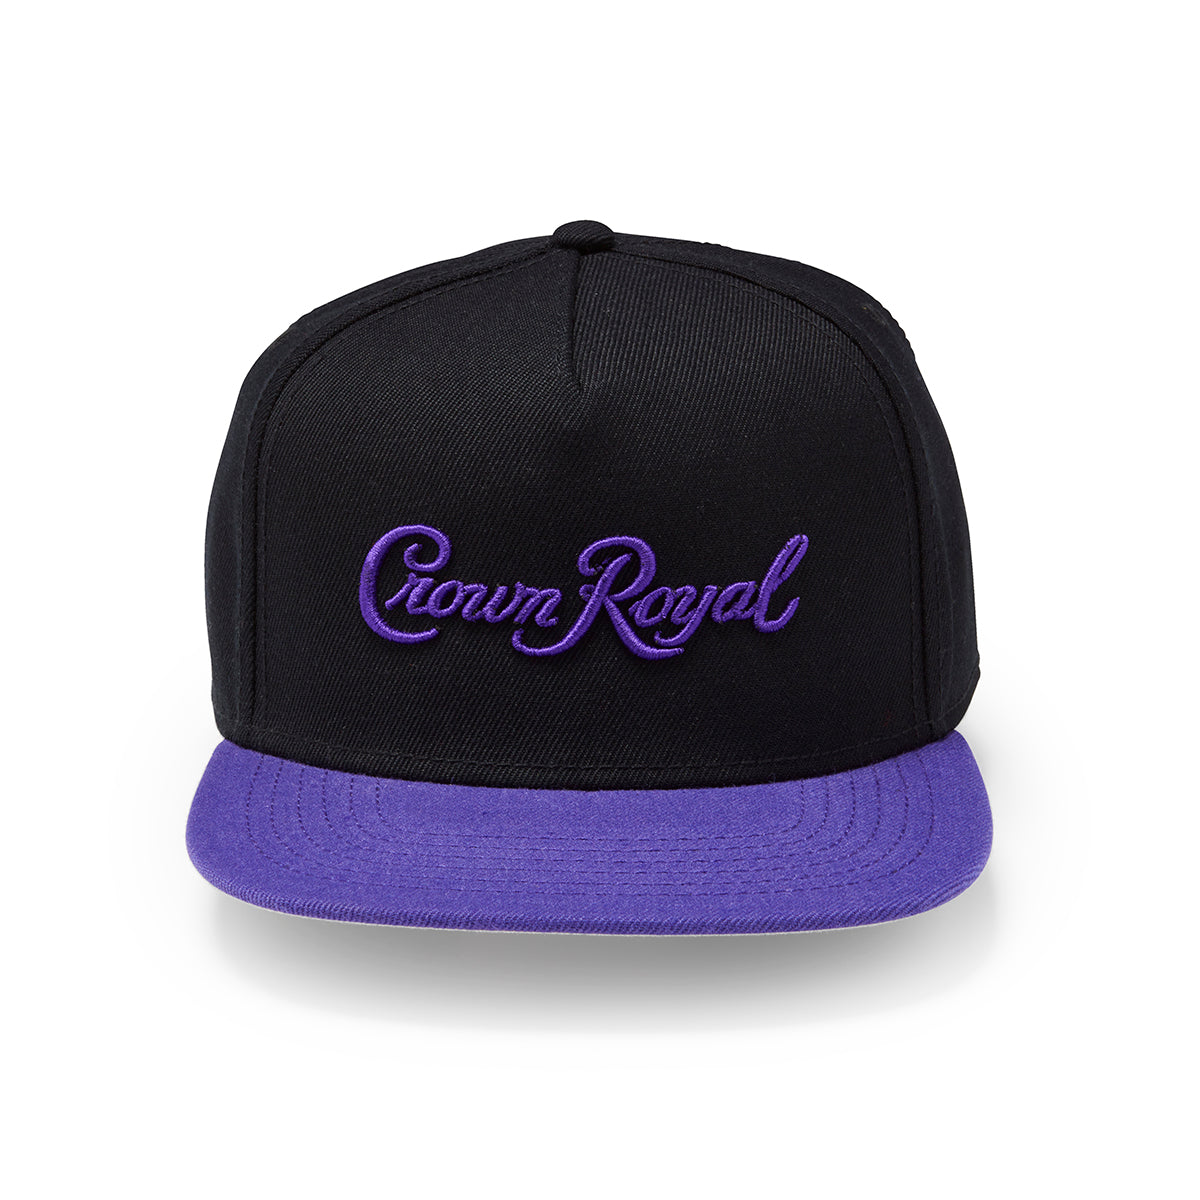 Crown Royal Fitted Cap